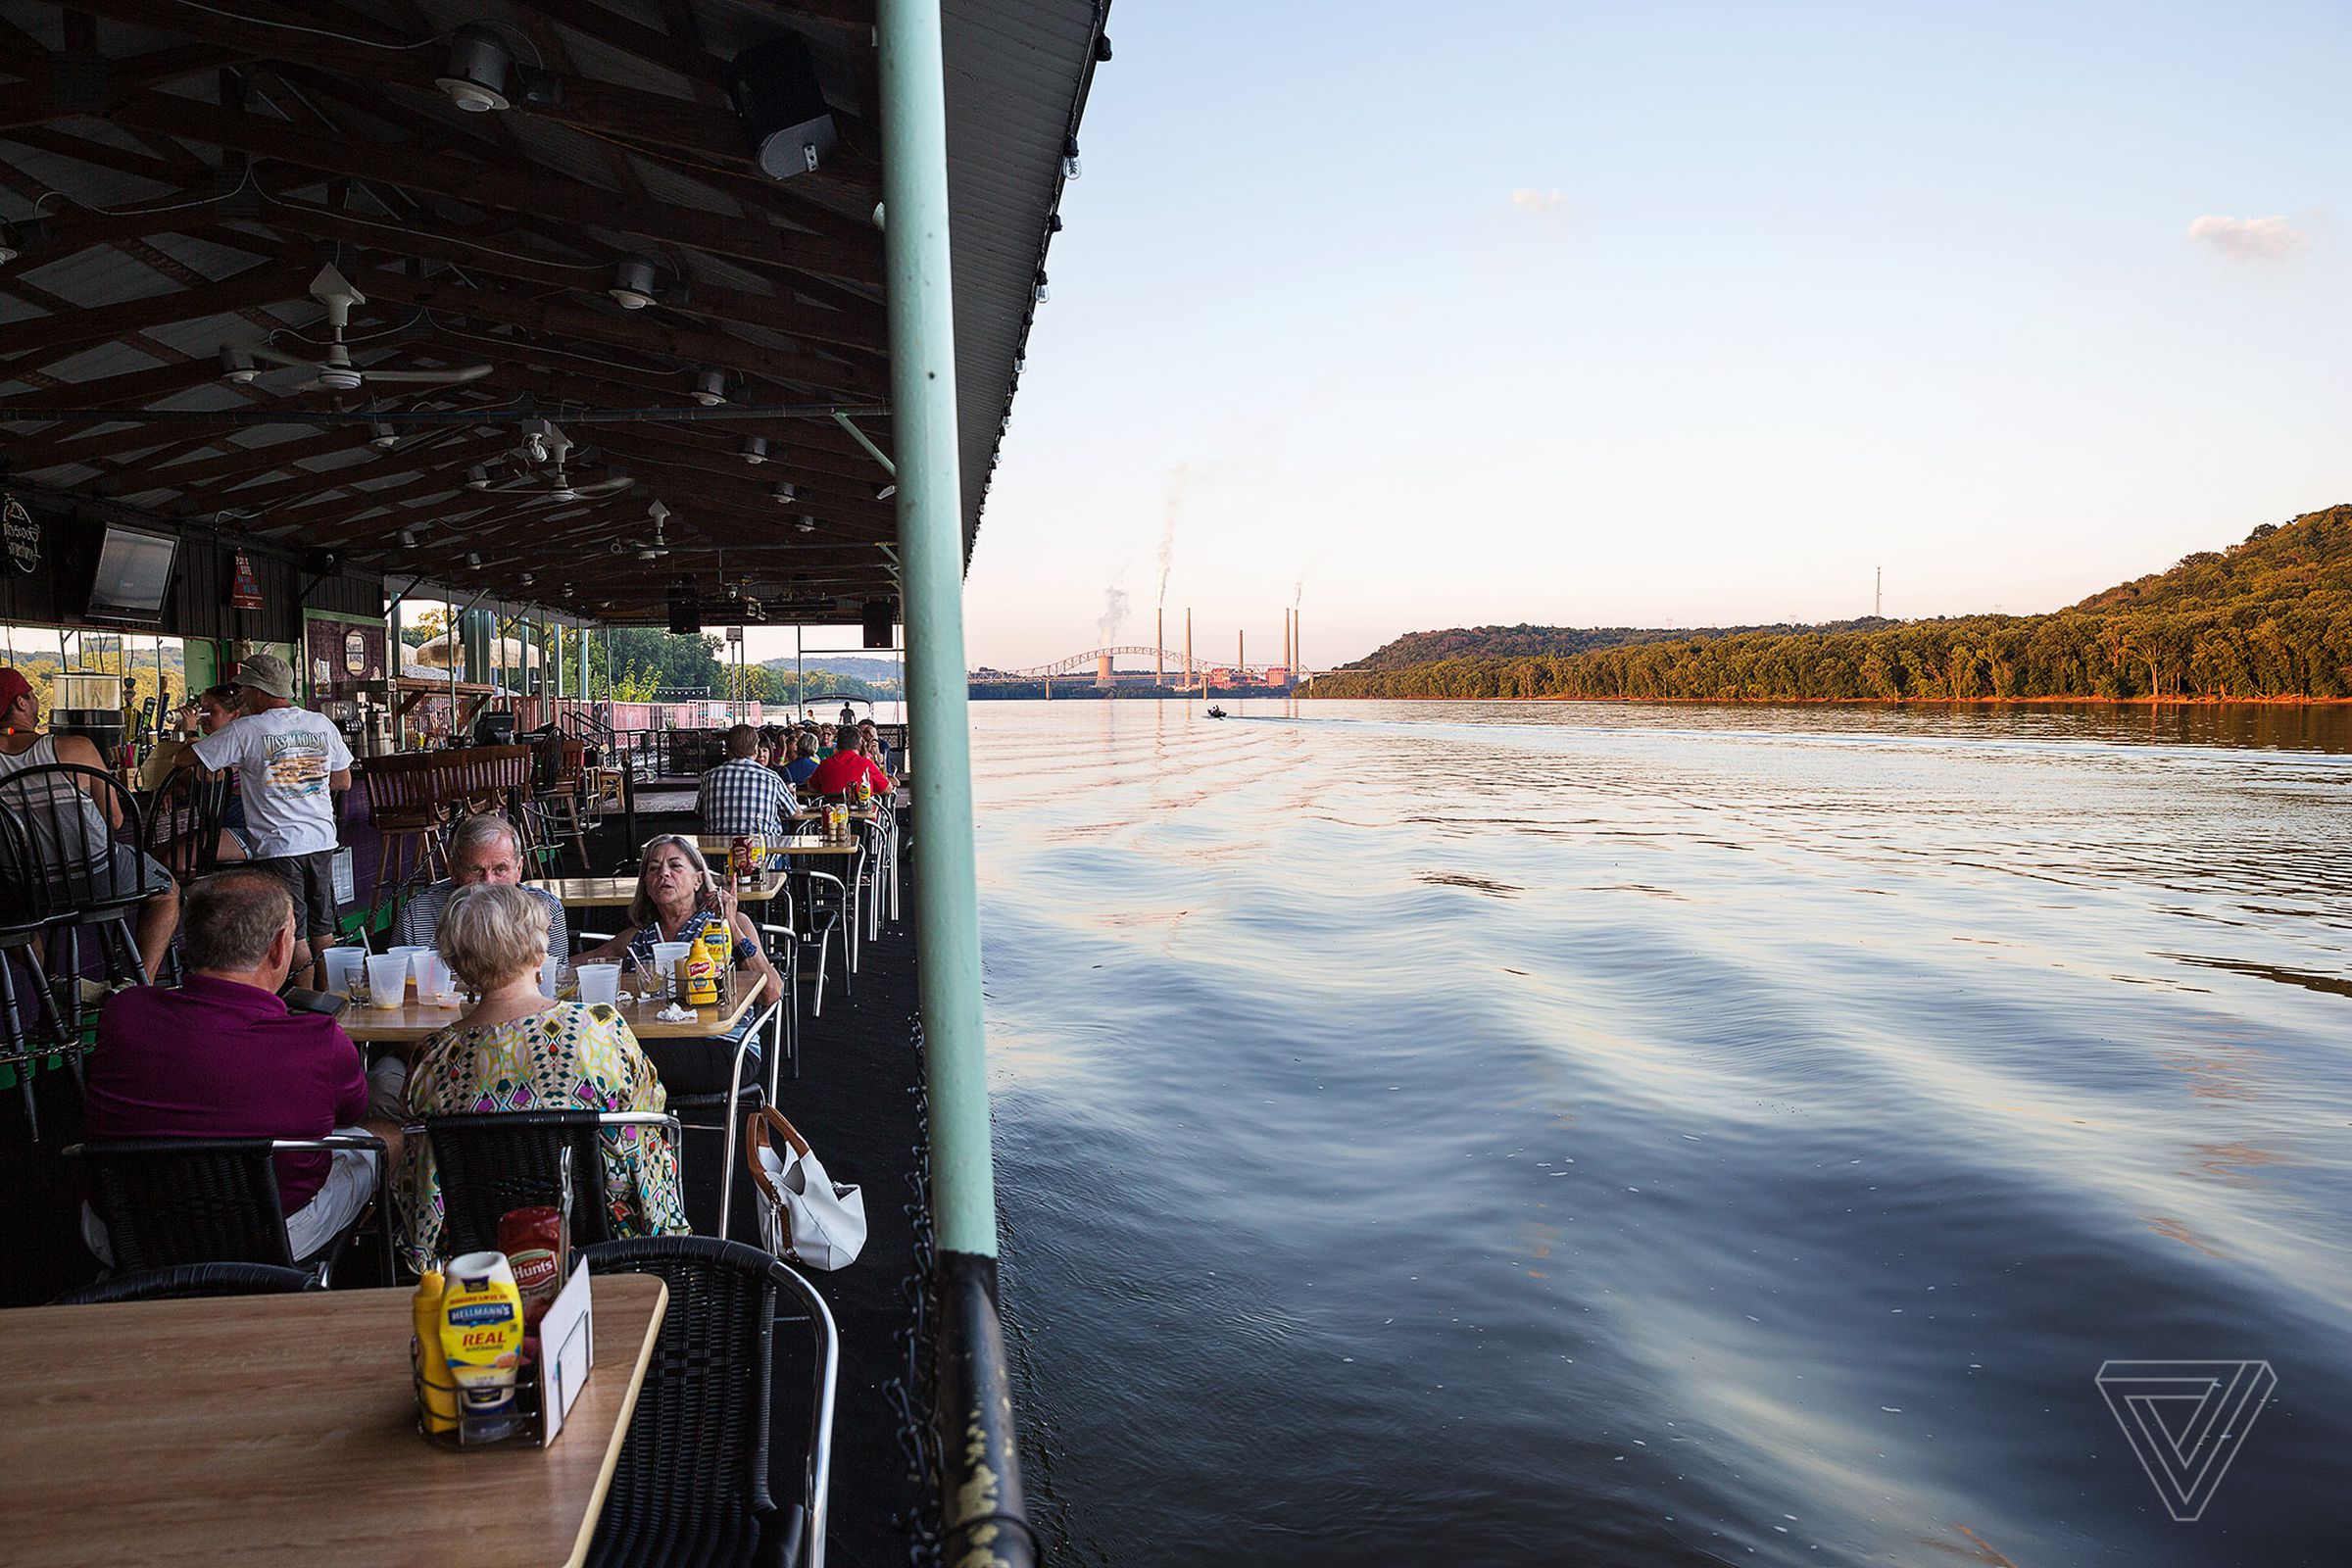 RiverWatch restaurant is a popular spot with locals and visitors to Lawrenceburg. It floats on a barge in the Ohio River off the Indiana side and faces Ohio. Just up the river is the Kentucky border.